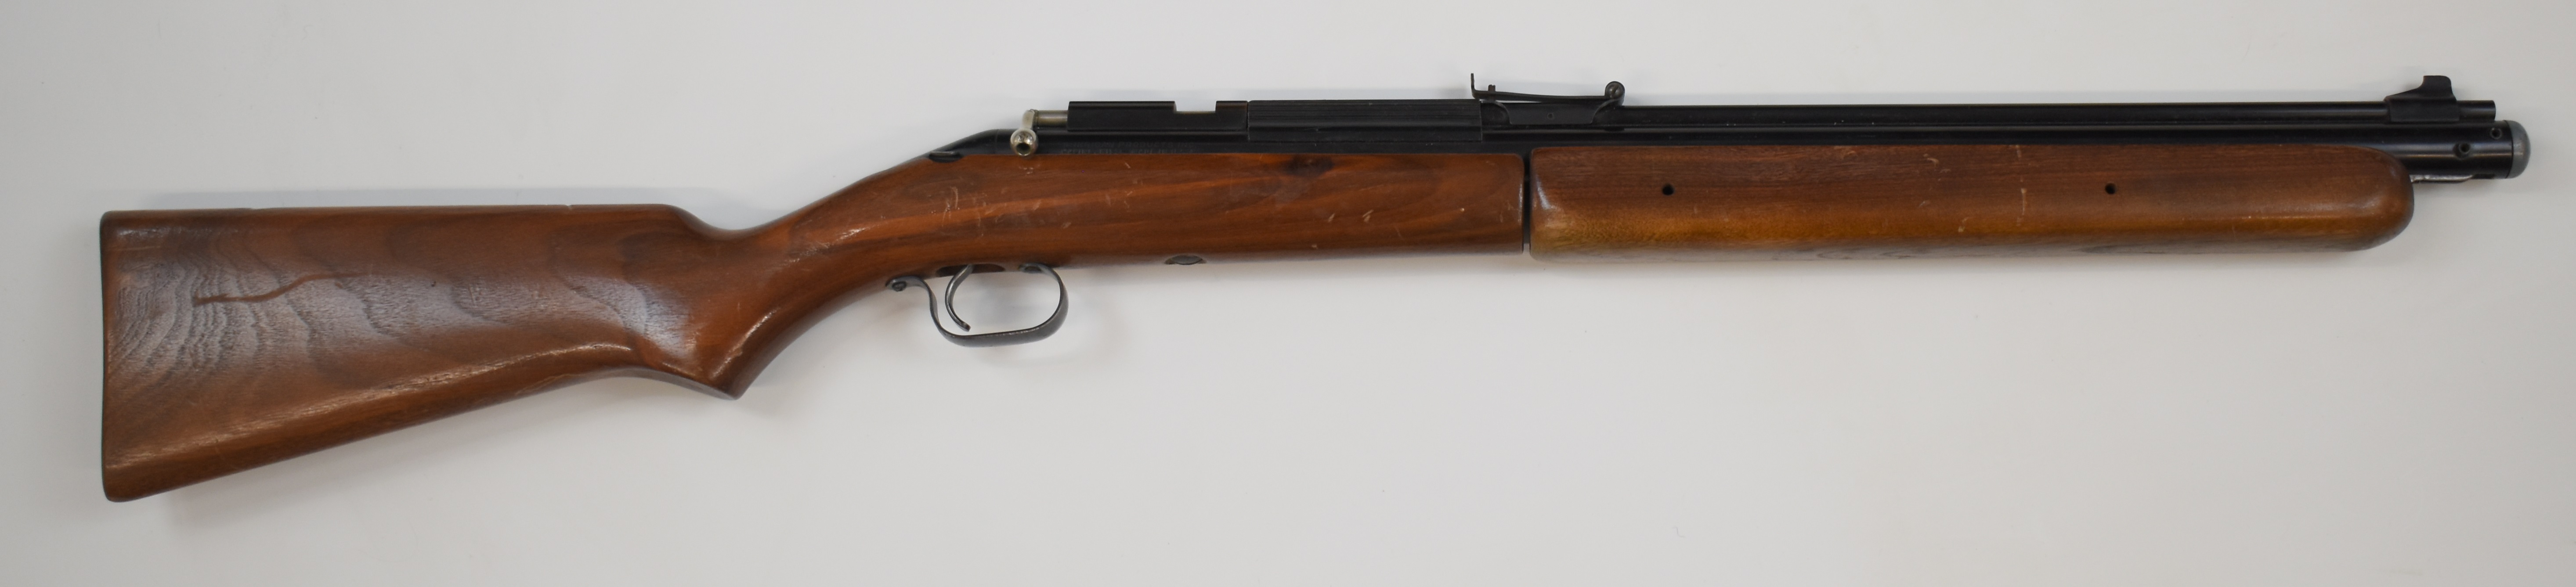 Sheridan Blue Streak .20 bolt-action air rifle with wooden semi-pistol grip and forend and - Image 2 of 8